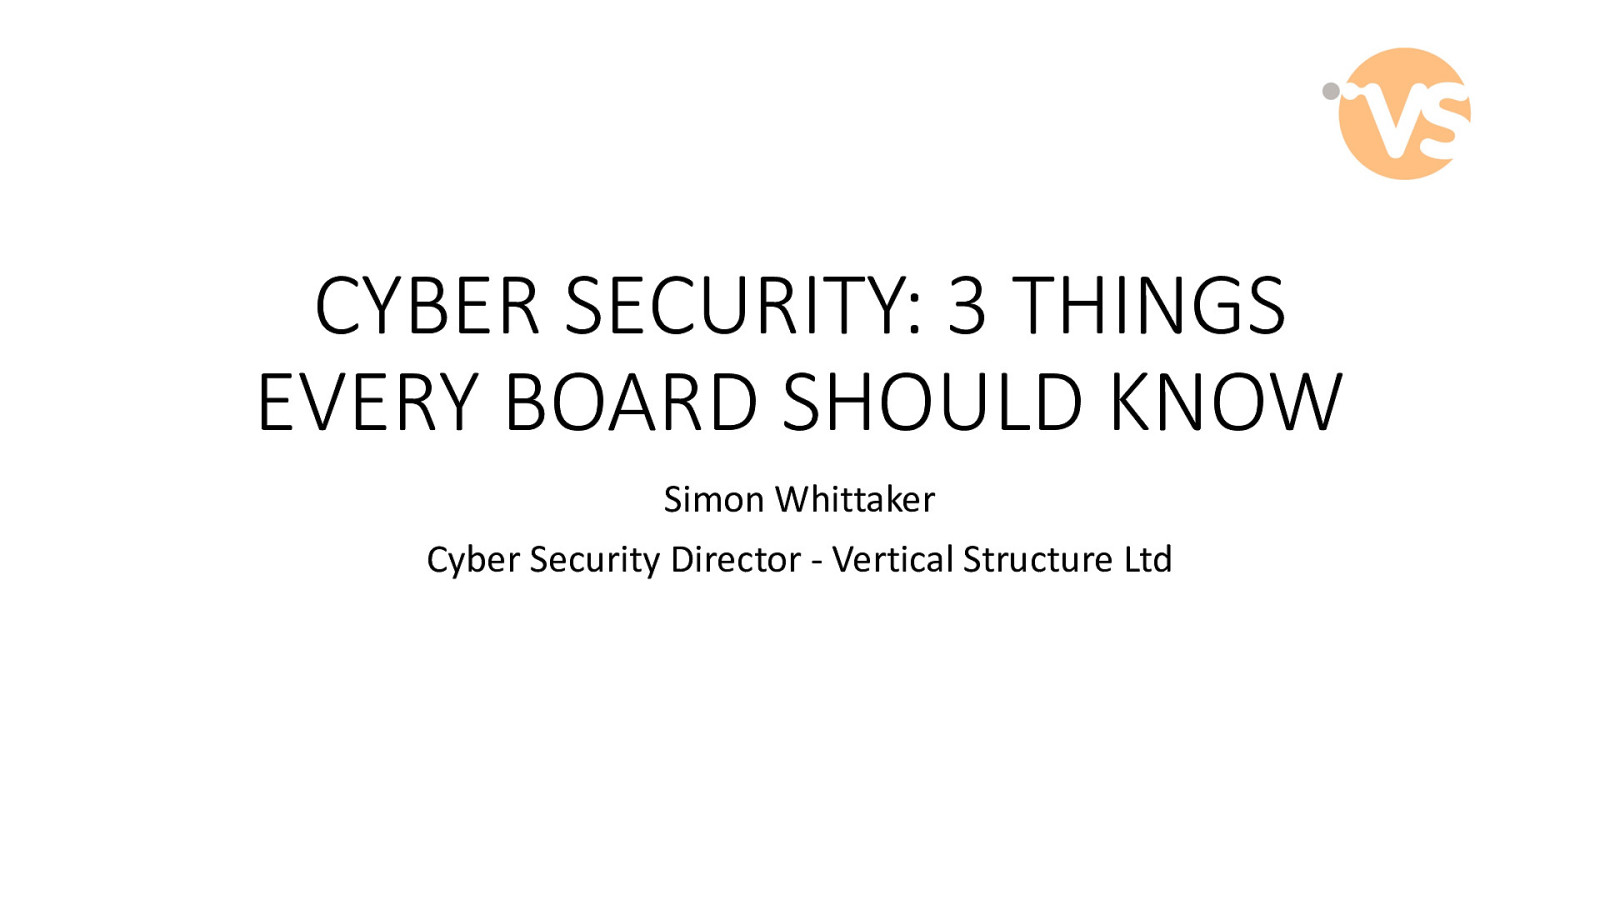 Cyber security: 3 things every Board should know to protect themselves and their employees